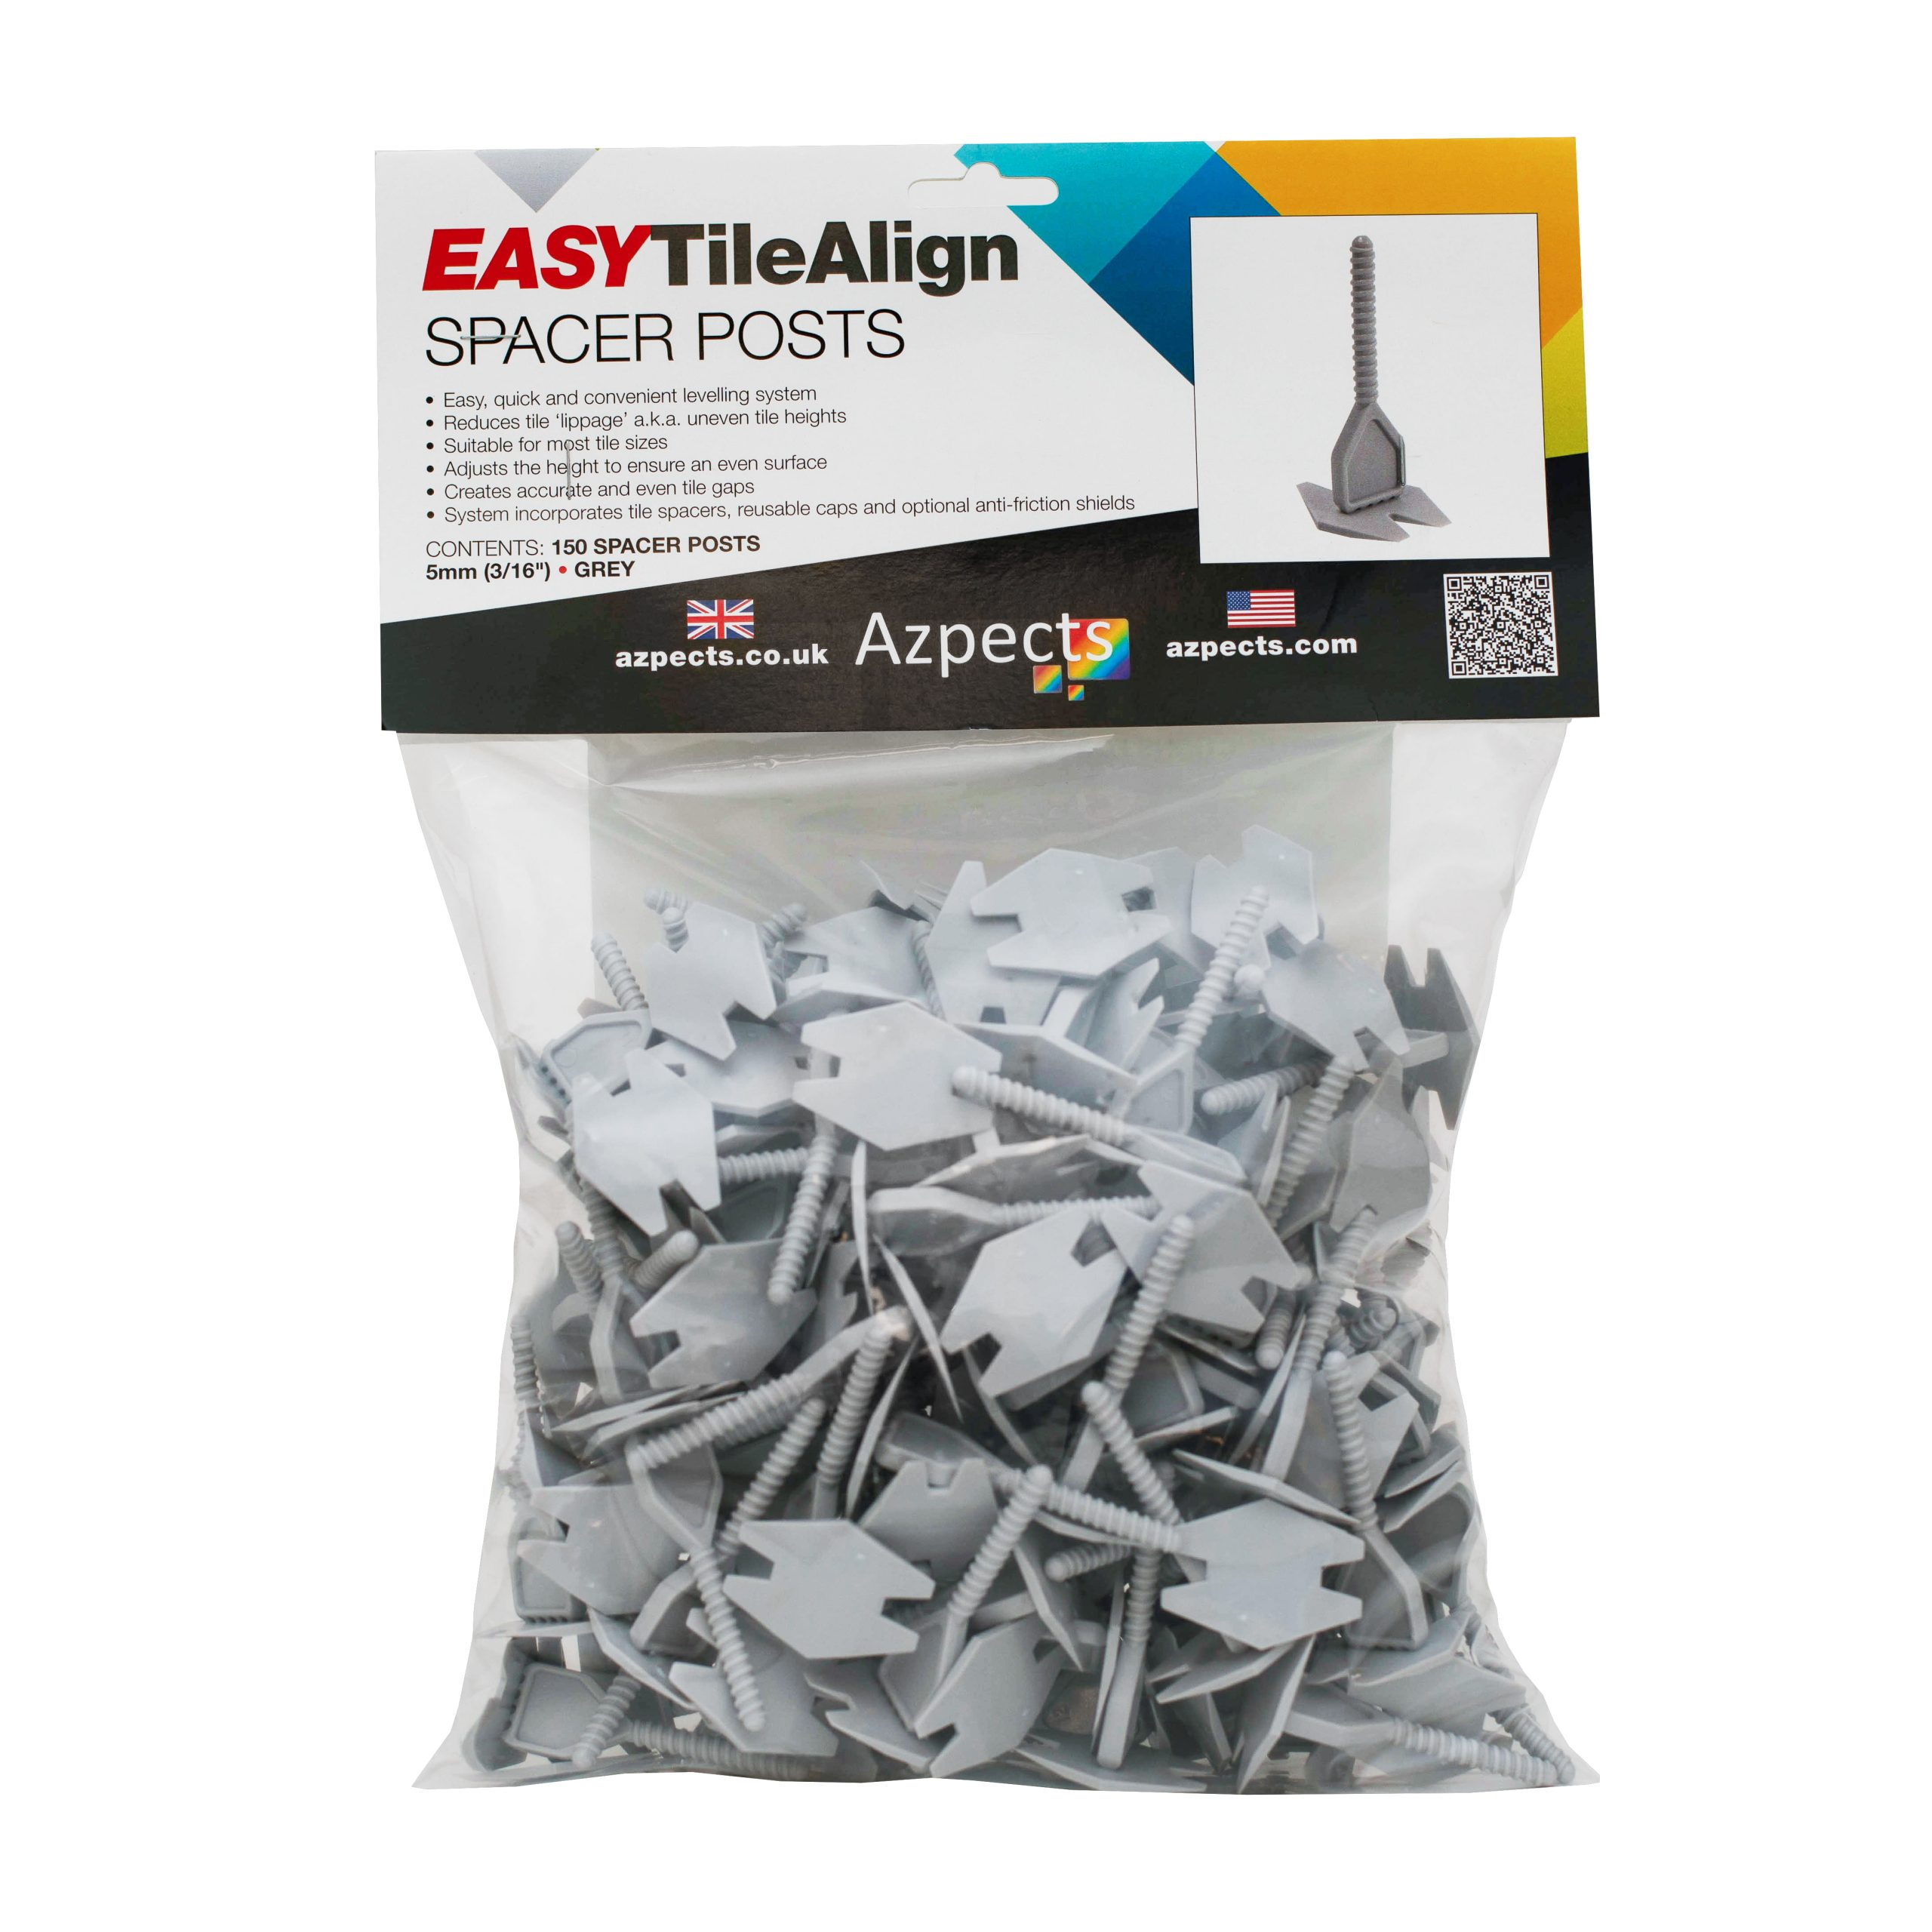 Azpects EASY TileAlign 5mm Yellow Spacer Posts (150 per bag)